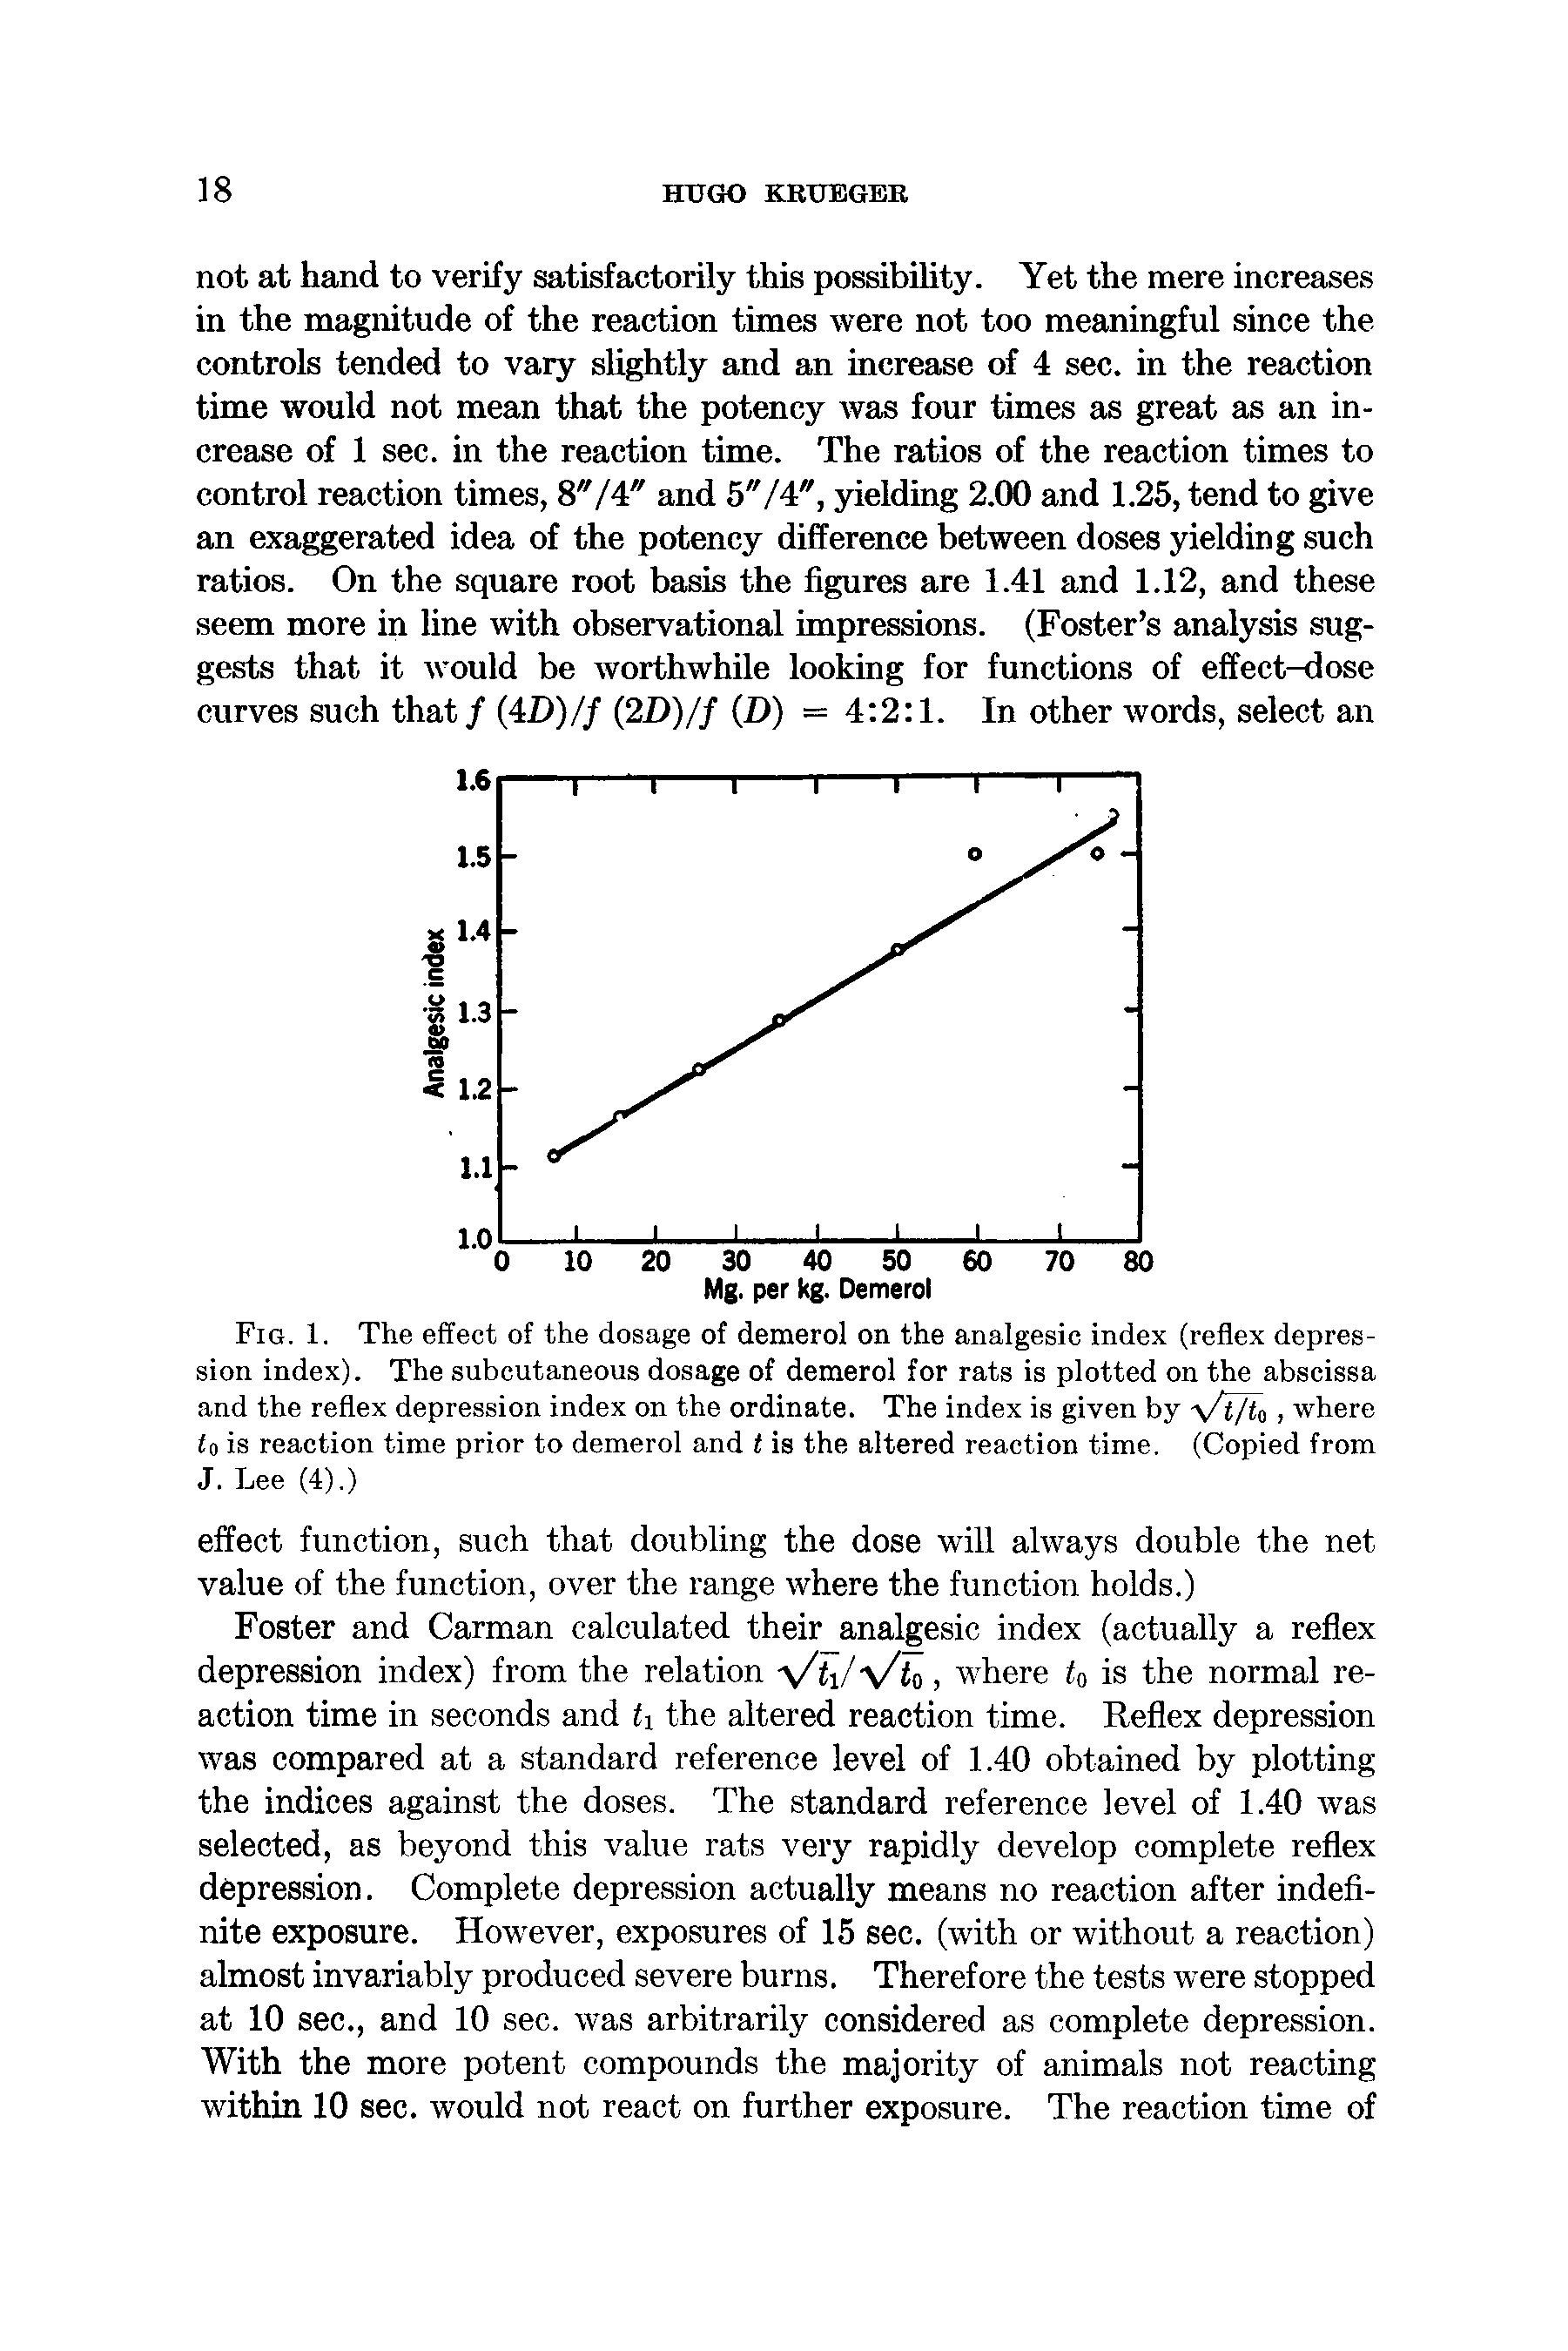 Fig. 1. The effect of the dosage of demerol on the analgesic index (reflex depression index). The subcutaneous dosage of demerol for rats is plotted on the abscissa and the reflex depression index on the ordinate. The index is given by x/ o, where to is reaction time prior to demerol and t is the altered reaction time, (Copied from J. Lee (4).)...